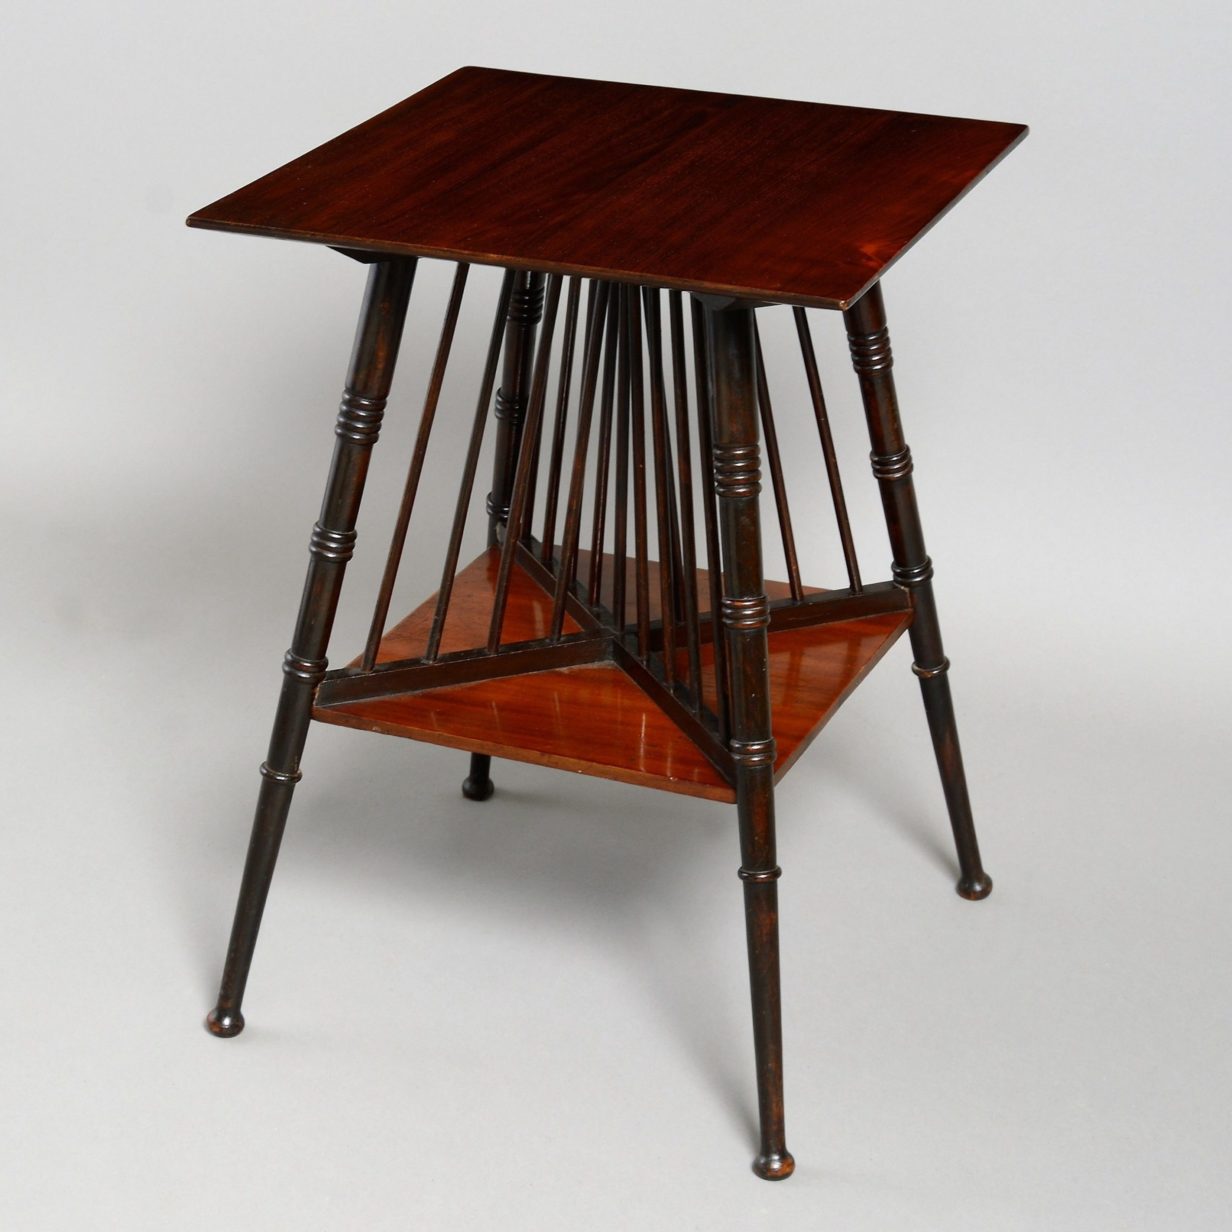 A late 19th century aesthetic movement occasional table